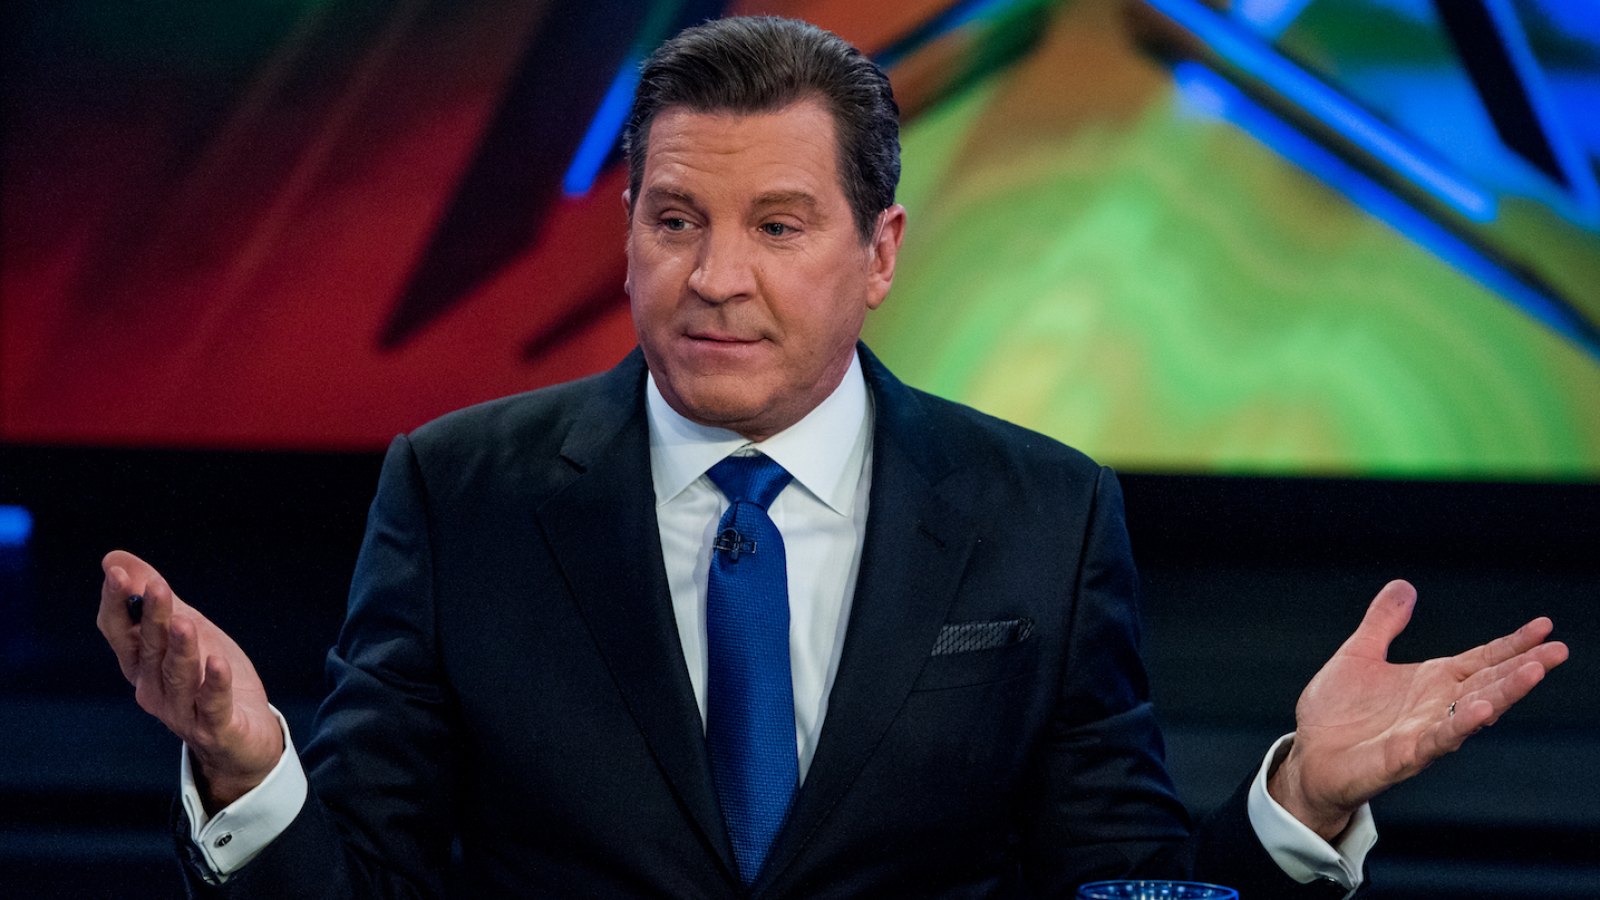 Fox News’ Eric Bolling Says ‘No Sign of Self Harm’ in Son’s Death